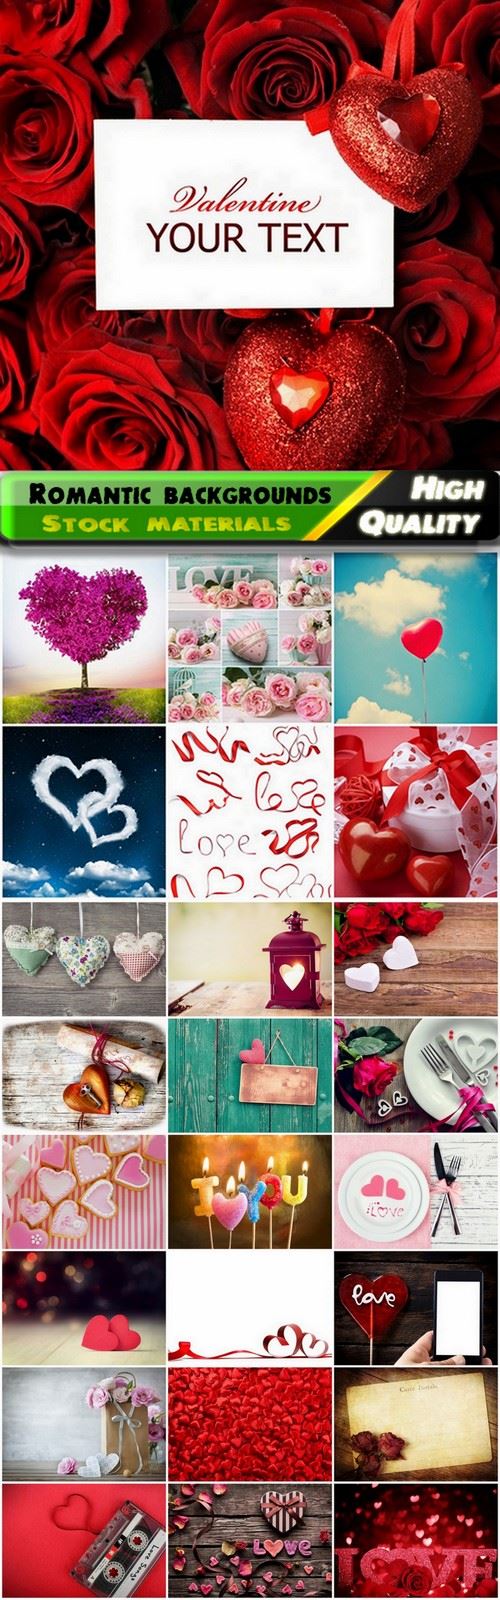 Romantic backgrounds with love theme - 25 HQ Jpg